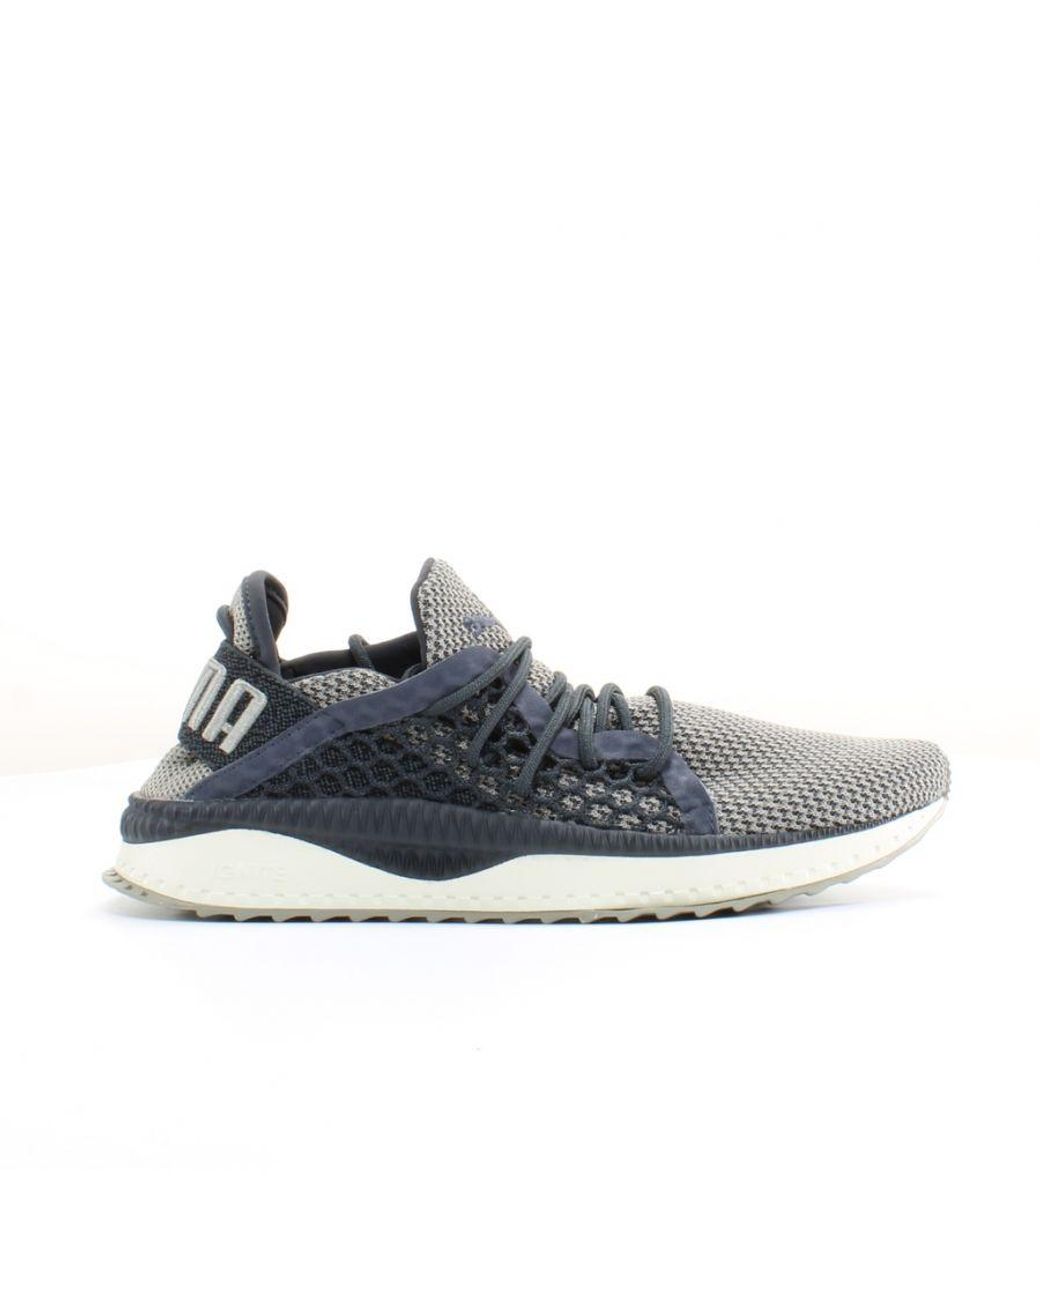 PUMA Tsugi Netfit Ignite Grey Textile Lace Up Trainers 364629 09 in Blue  for Men | Lyst UK